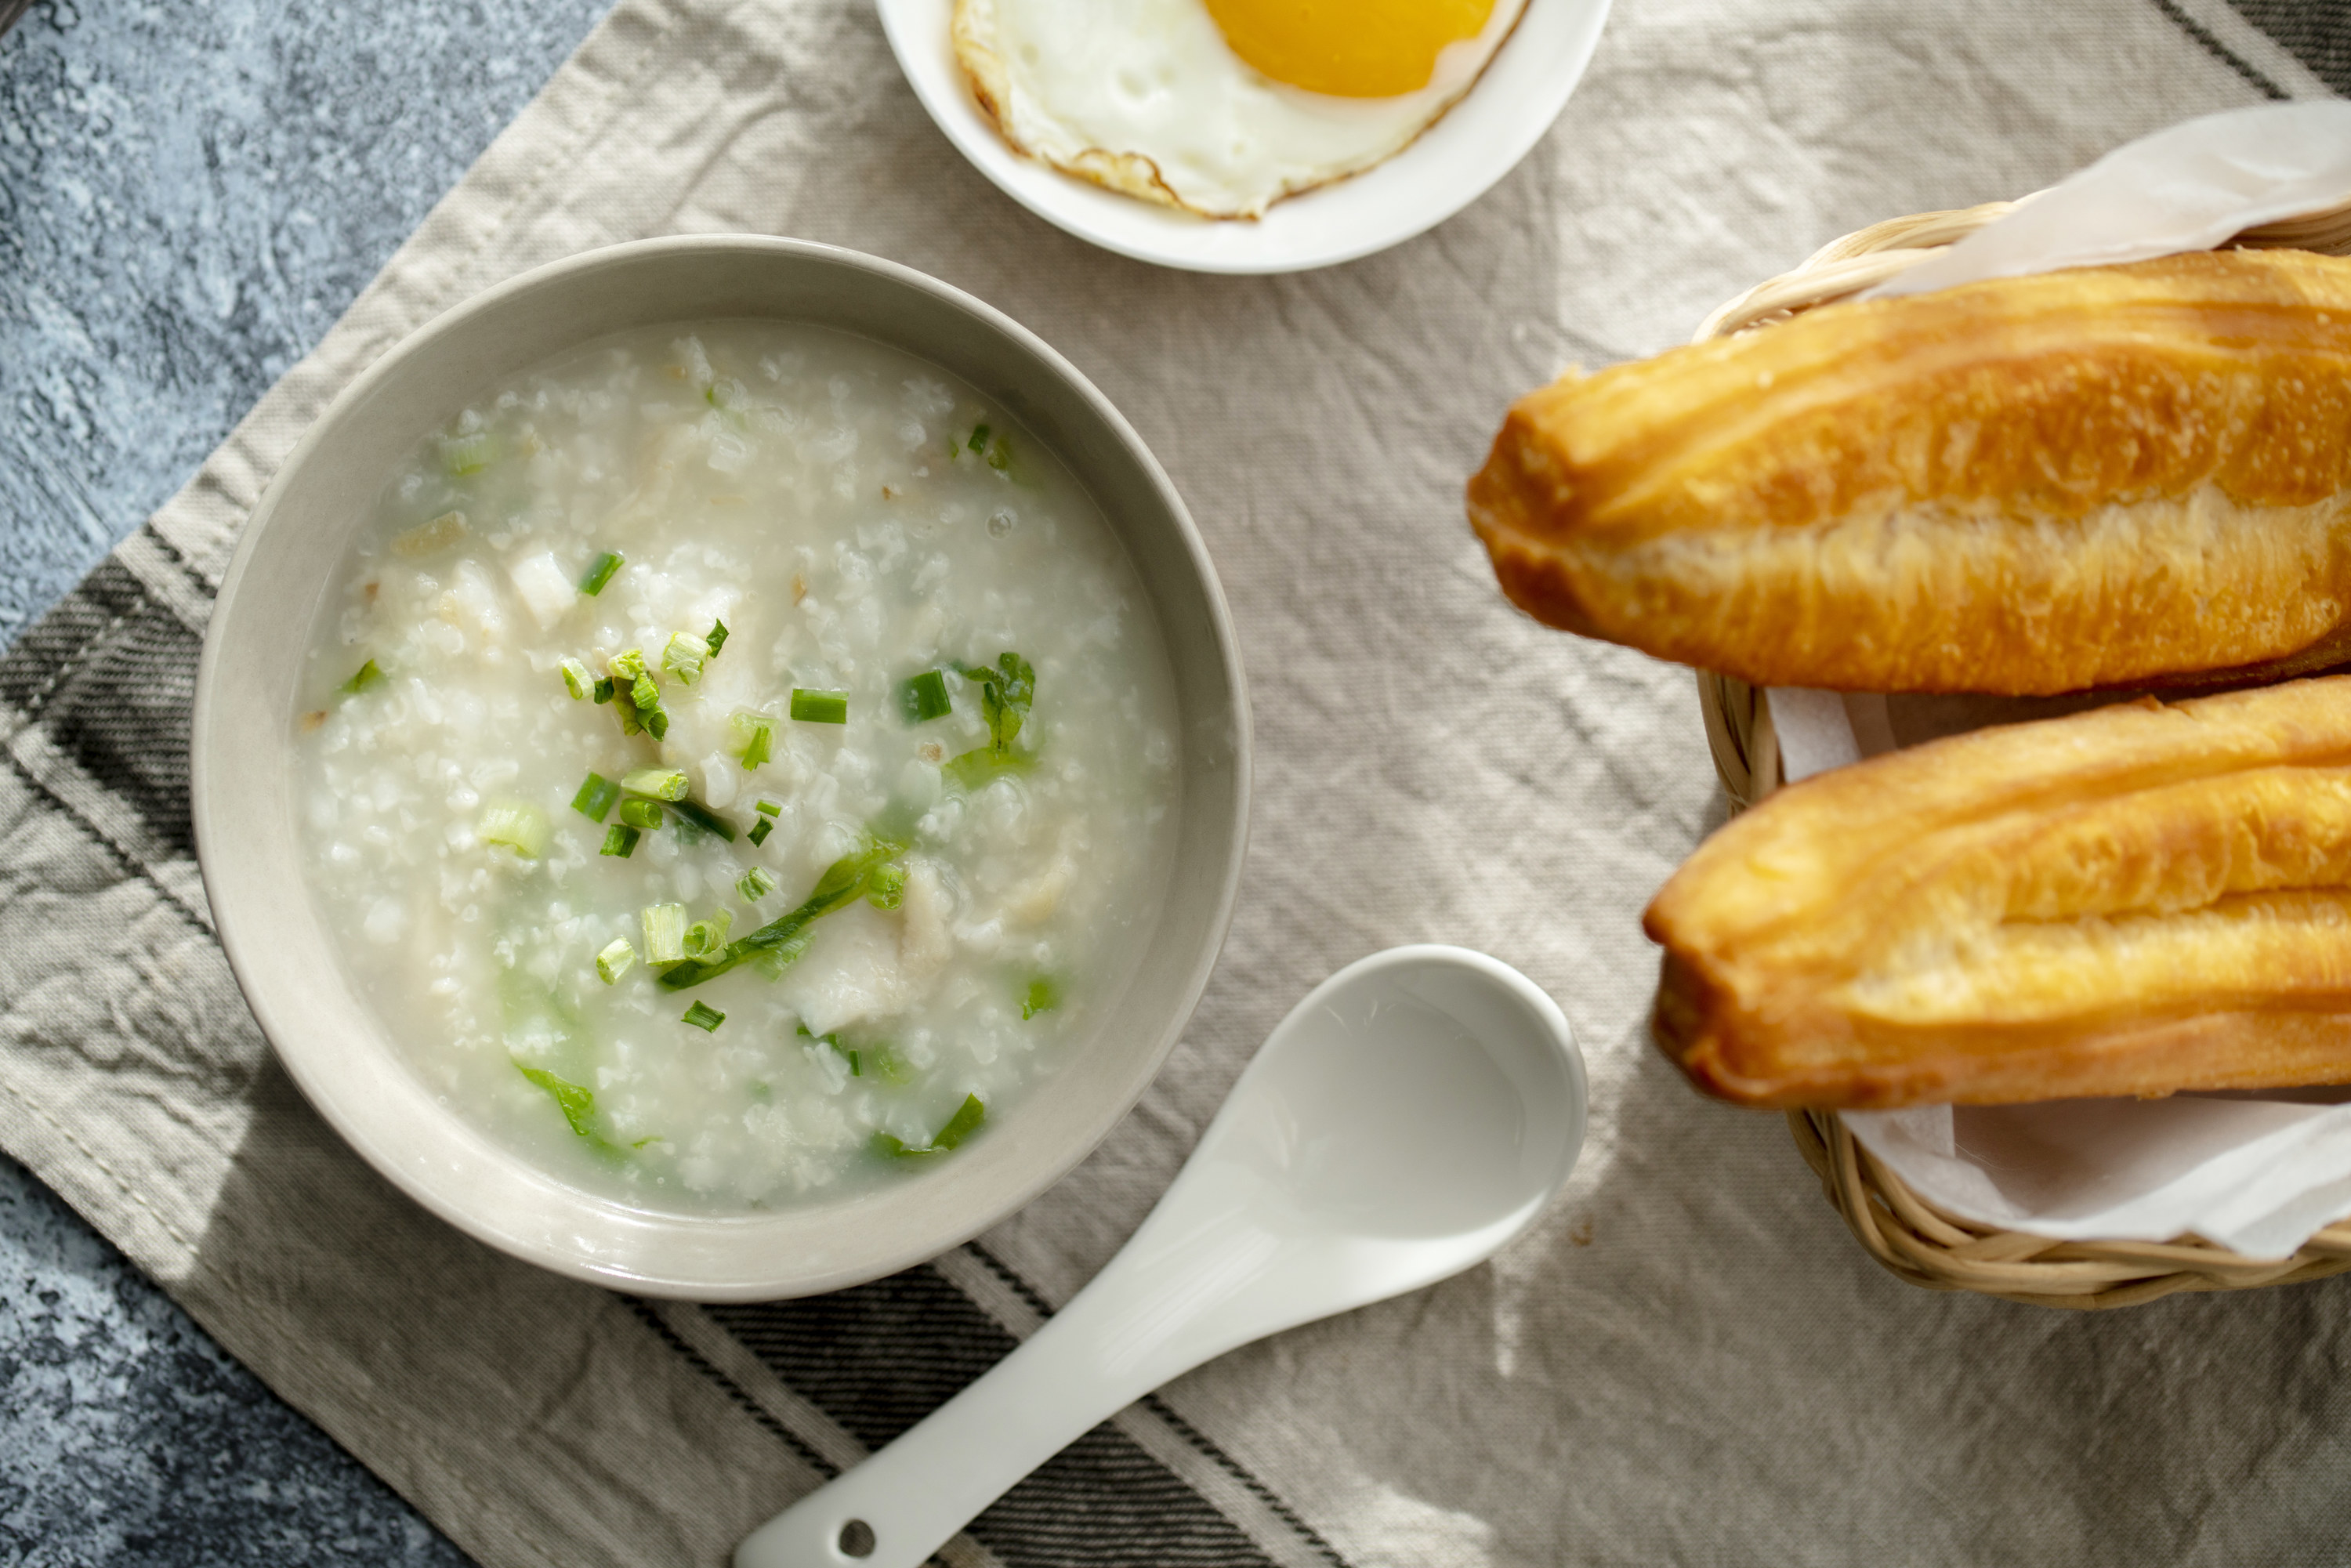 Congee in a bowl with a white soup spoon nearby with eggs and bread off to the side